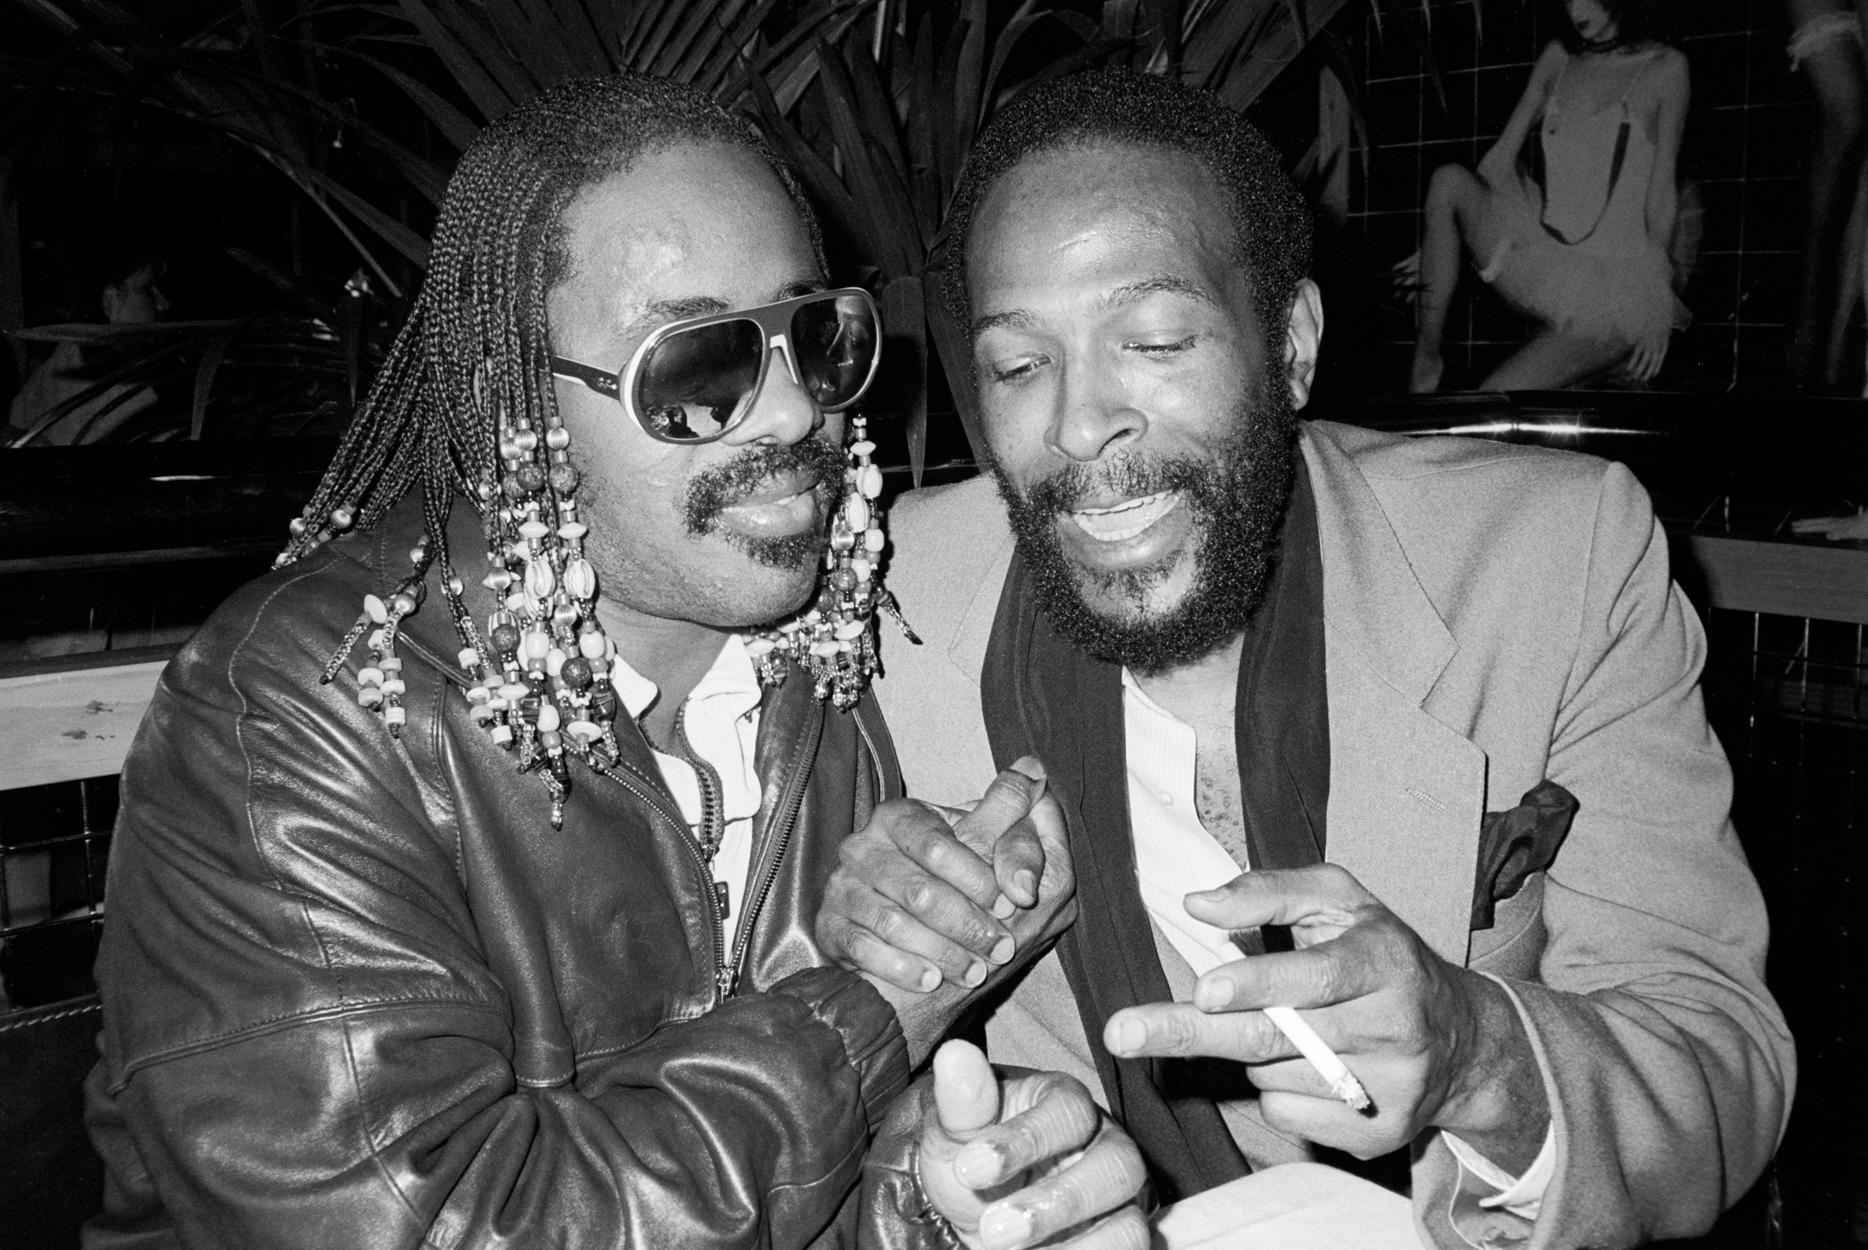 Richard Young Portrait Photograph - Stevie Wonder and Marvin Gaye, Stringfellows, London, 1981, Photography